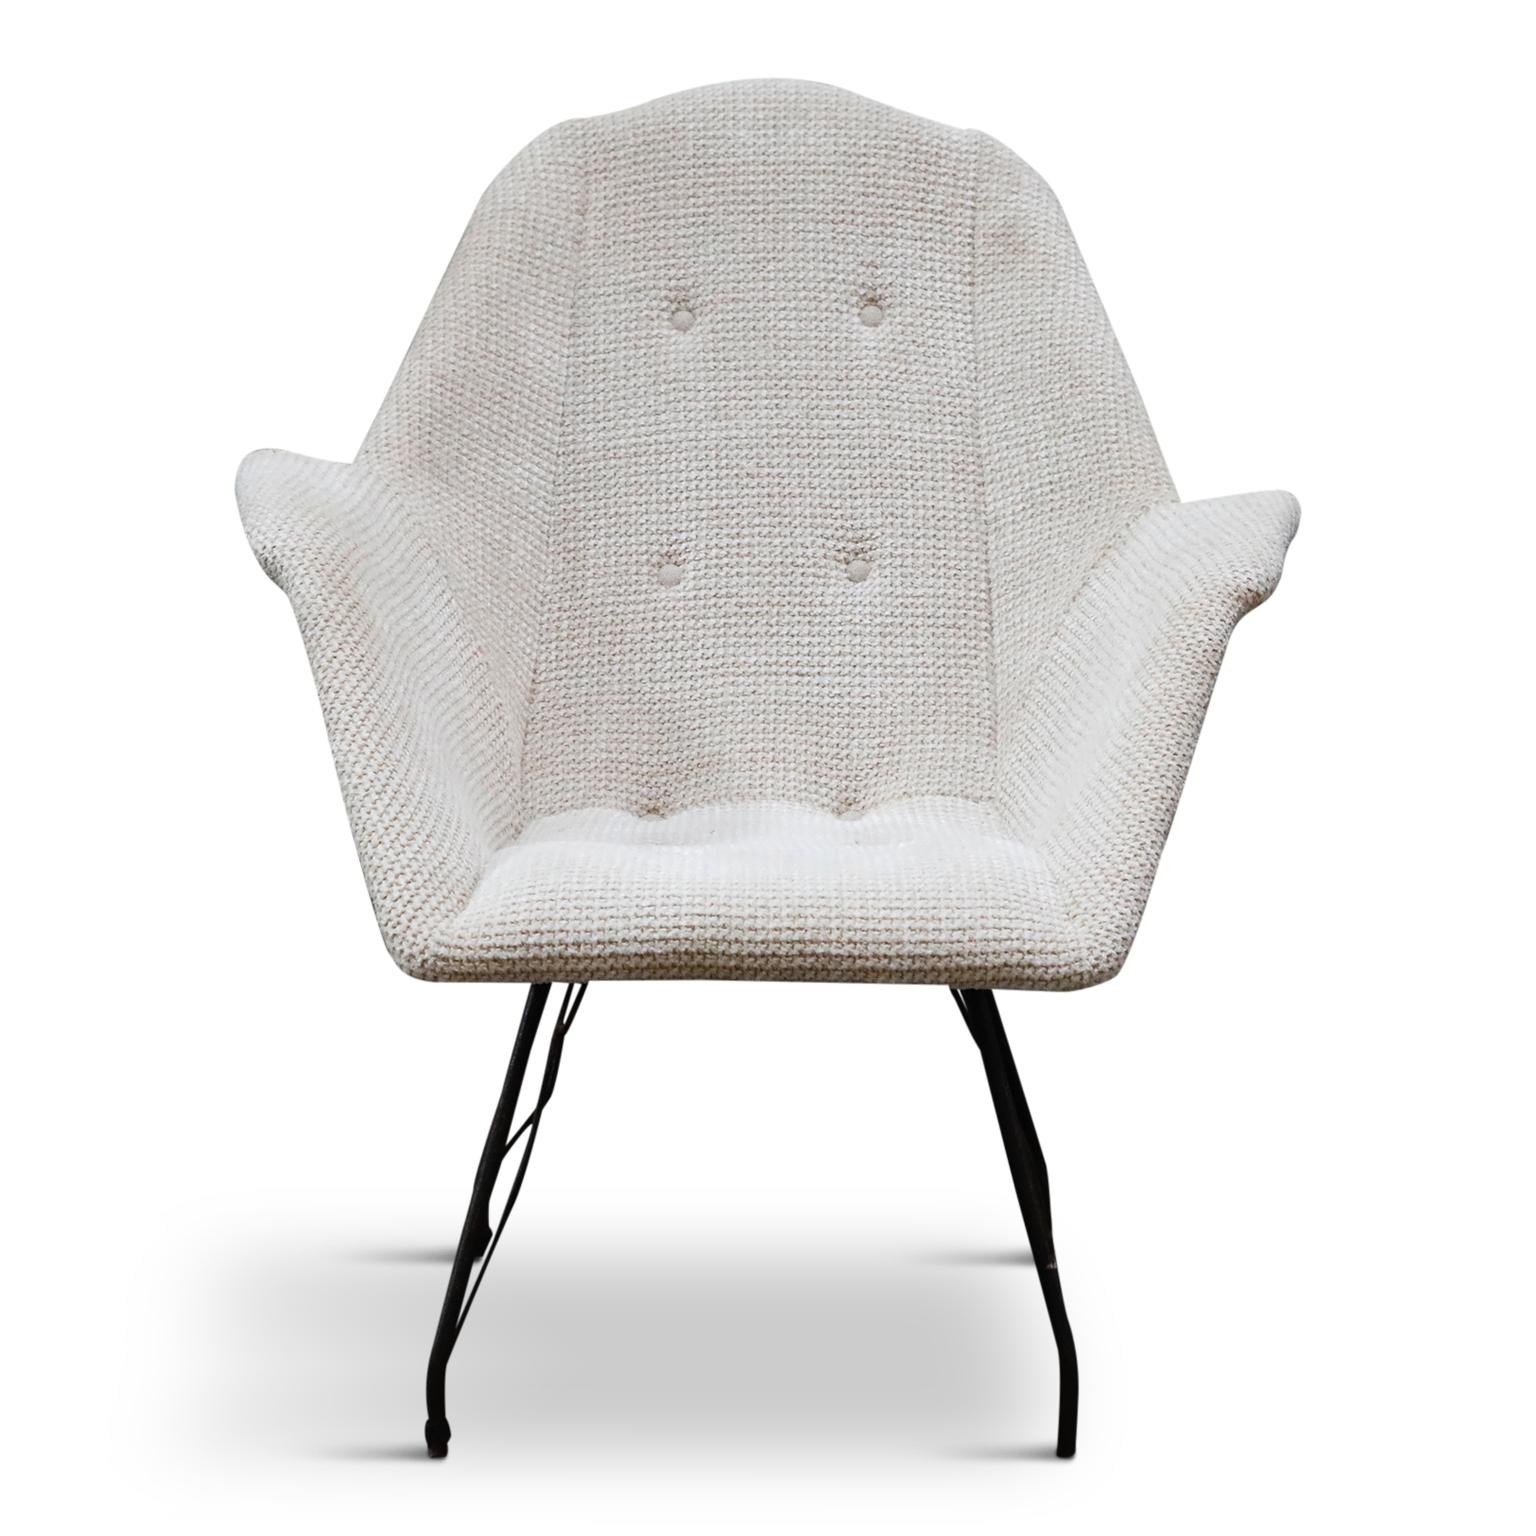 Just arrived from Rio de Janeiro, this rare 1950s armchair by Martin Eisler and Carlo Hauner for Forma Brazil encapsulates the quality and innovation of their designs. This elegant 'Concha' scoop arm chair with its slightly reclined back and angular